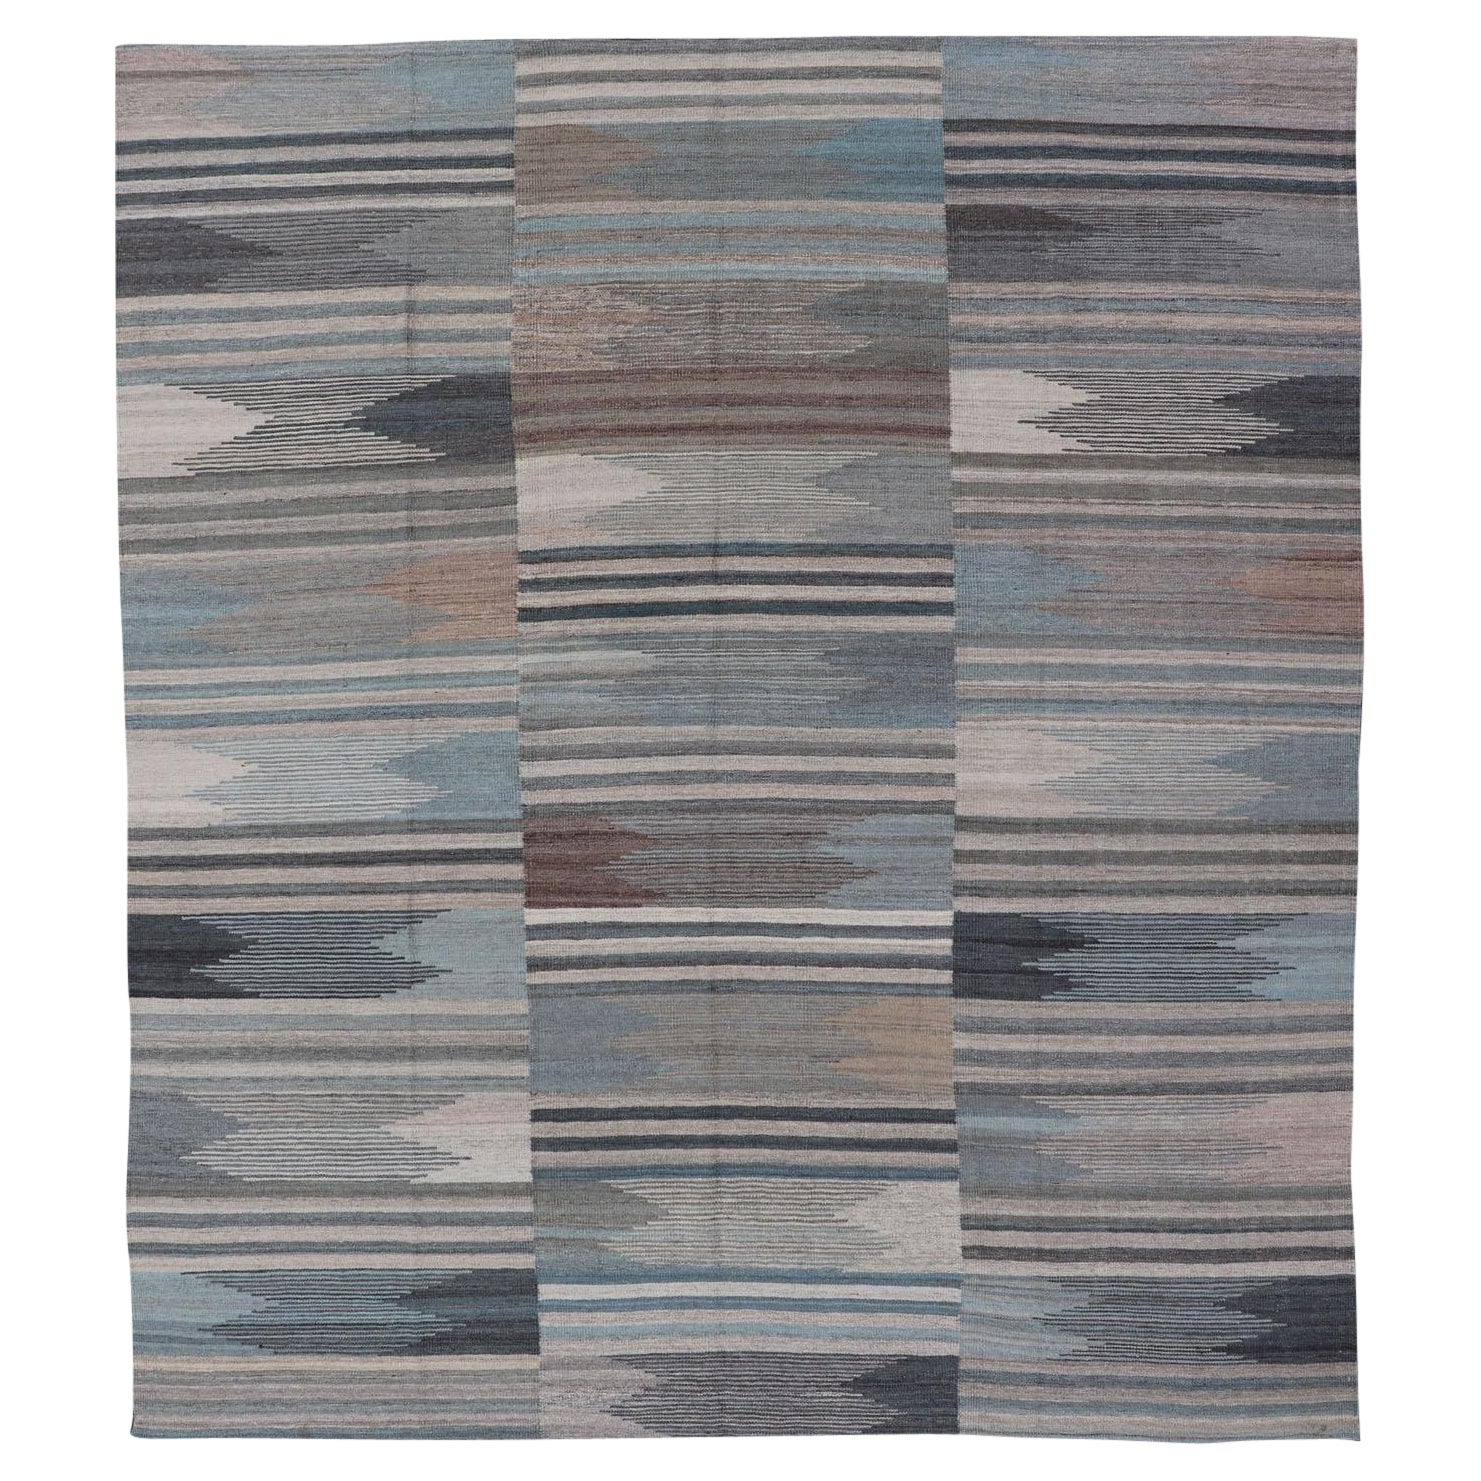 Modern Afghanistan Kilim with Blue, Brown, Gray and Cream